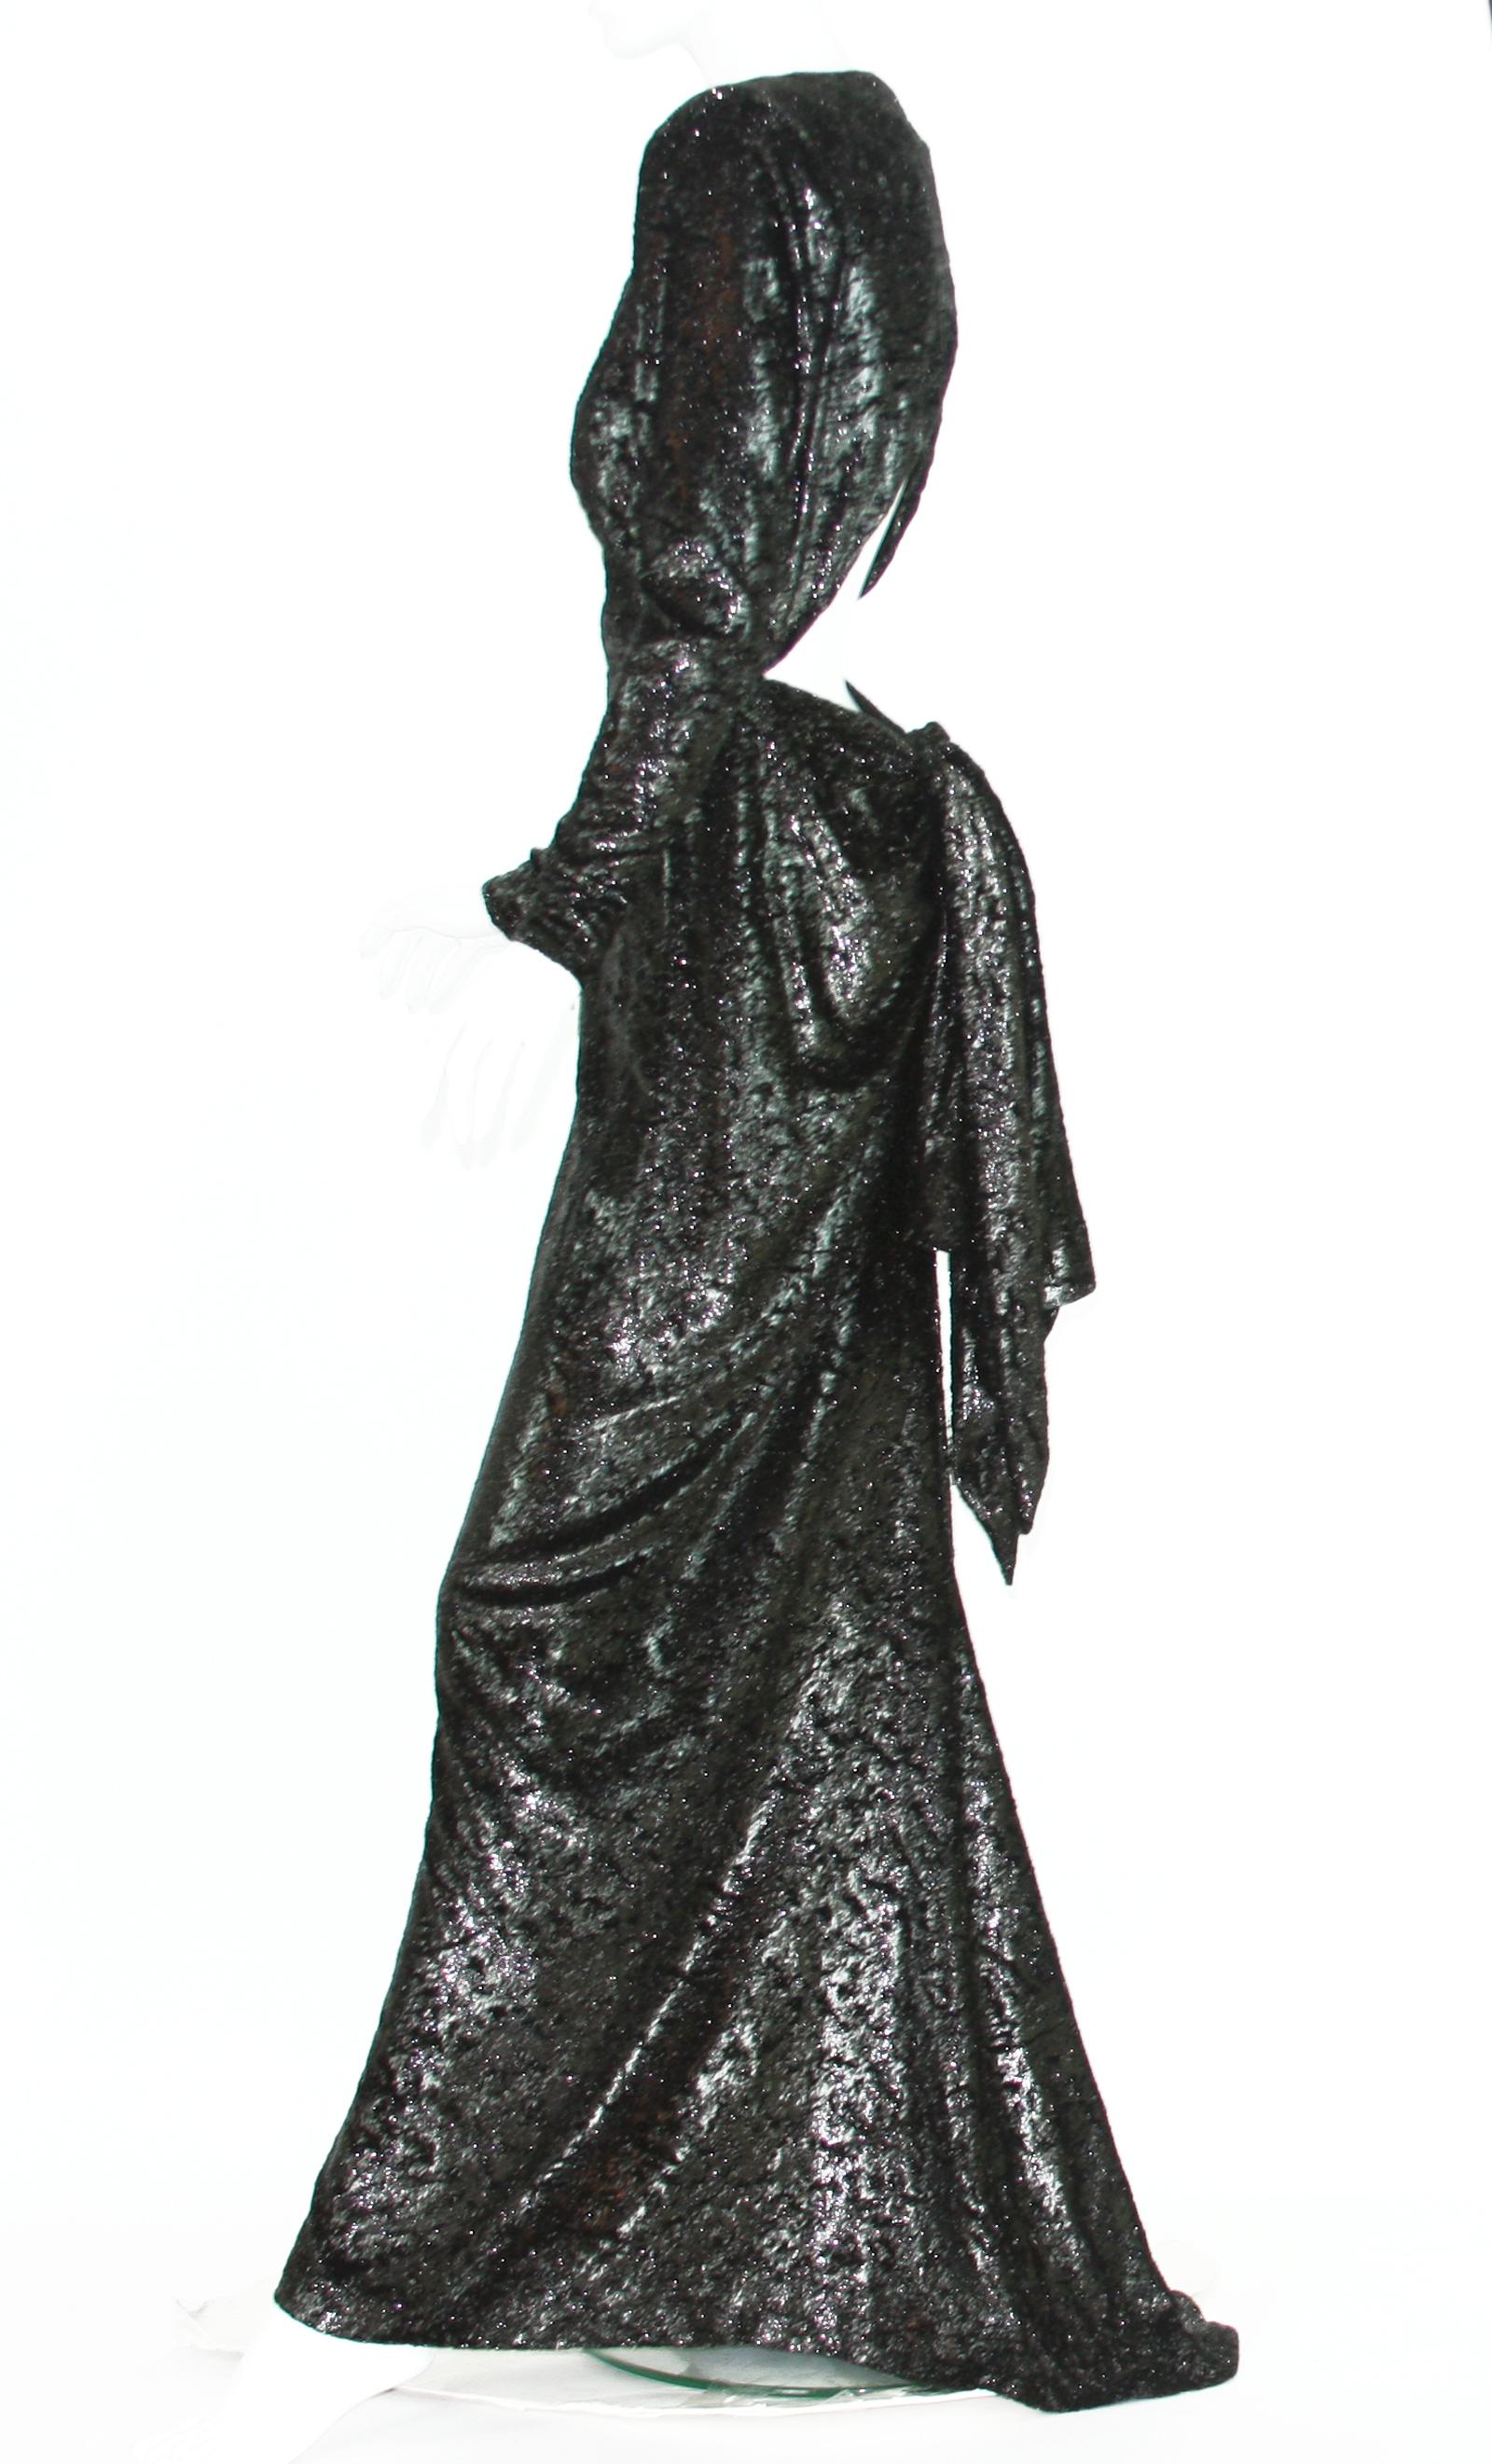 Rare 2 in 1 Yves Saint Laurent Couture Crushed Velvet Numbered Dress c. 1986 For Sale 1